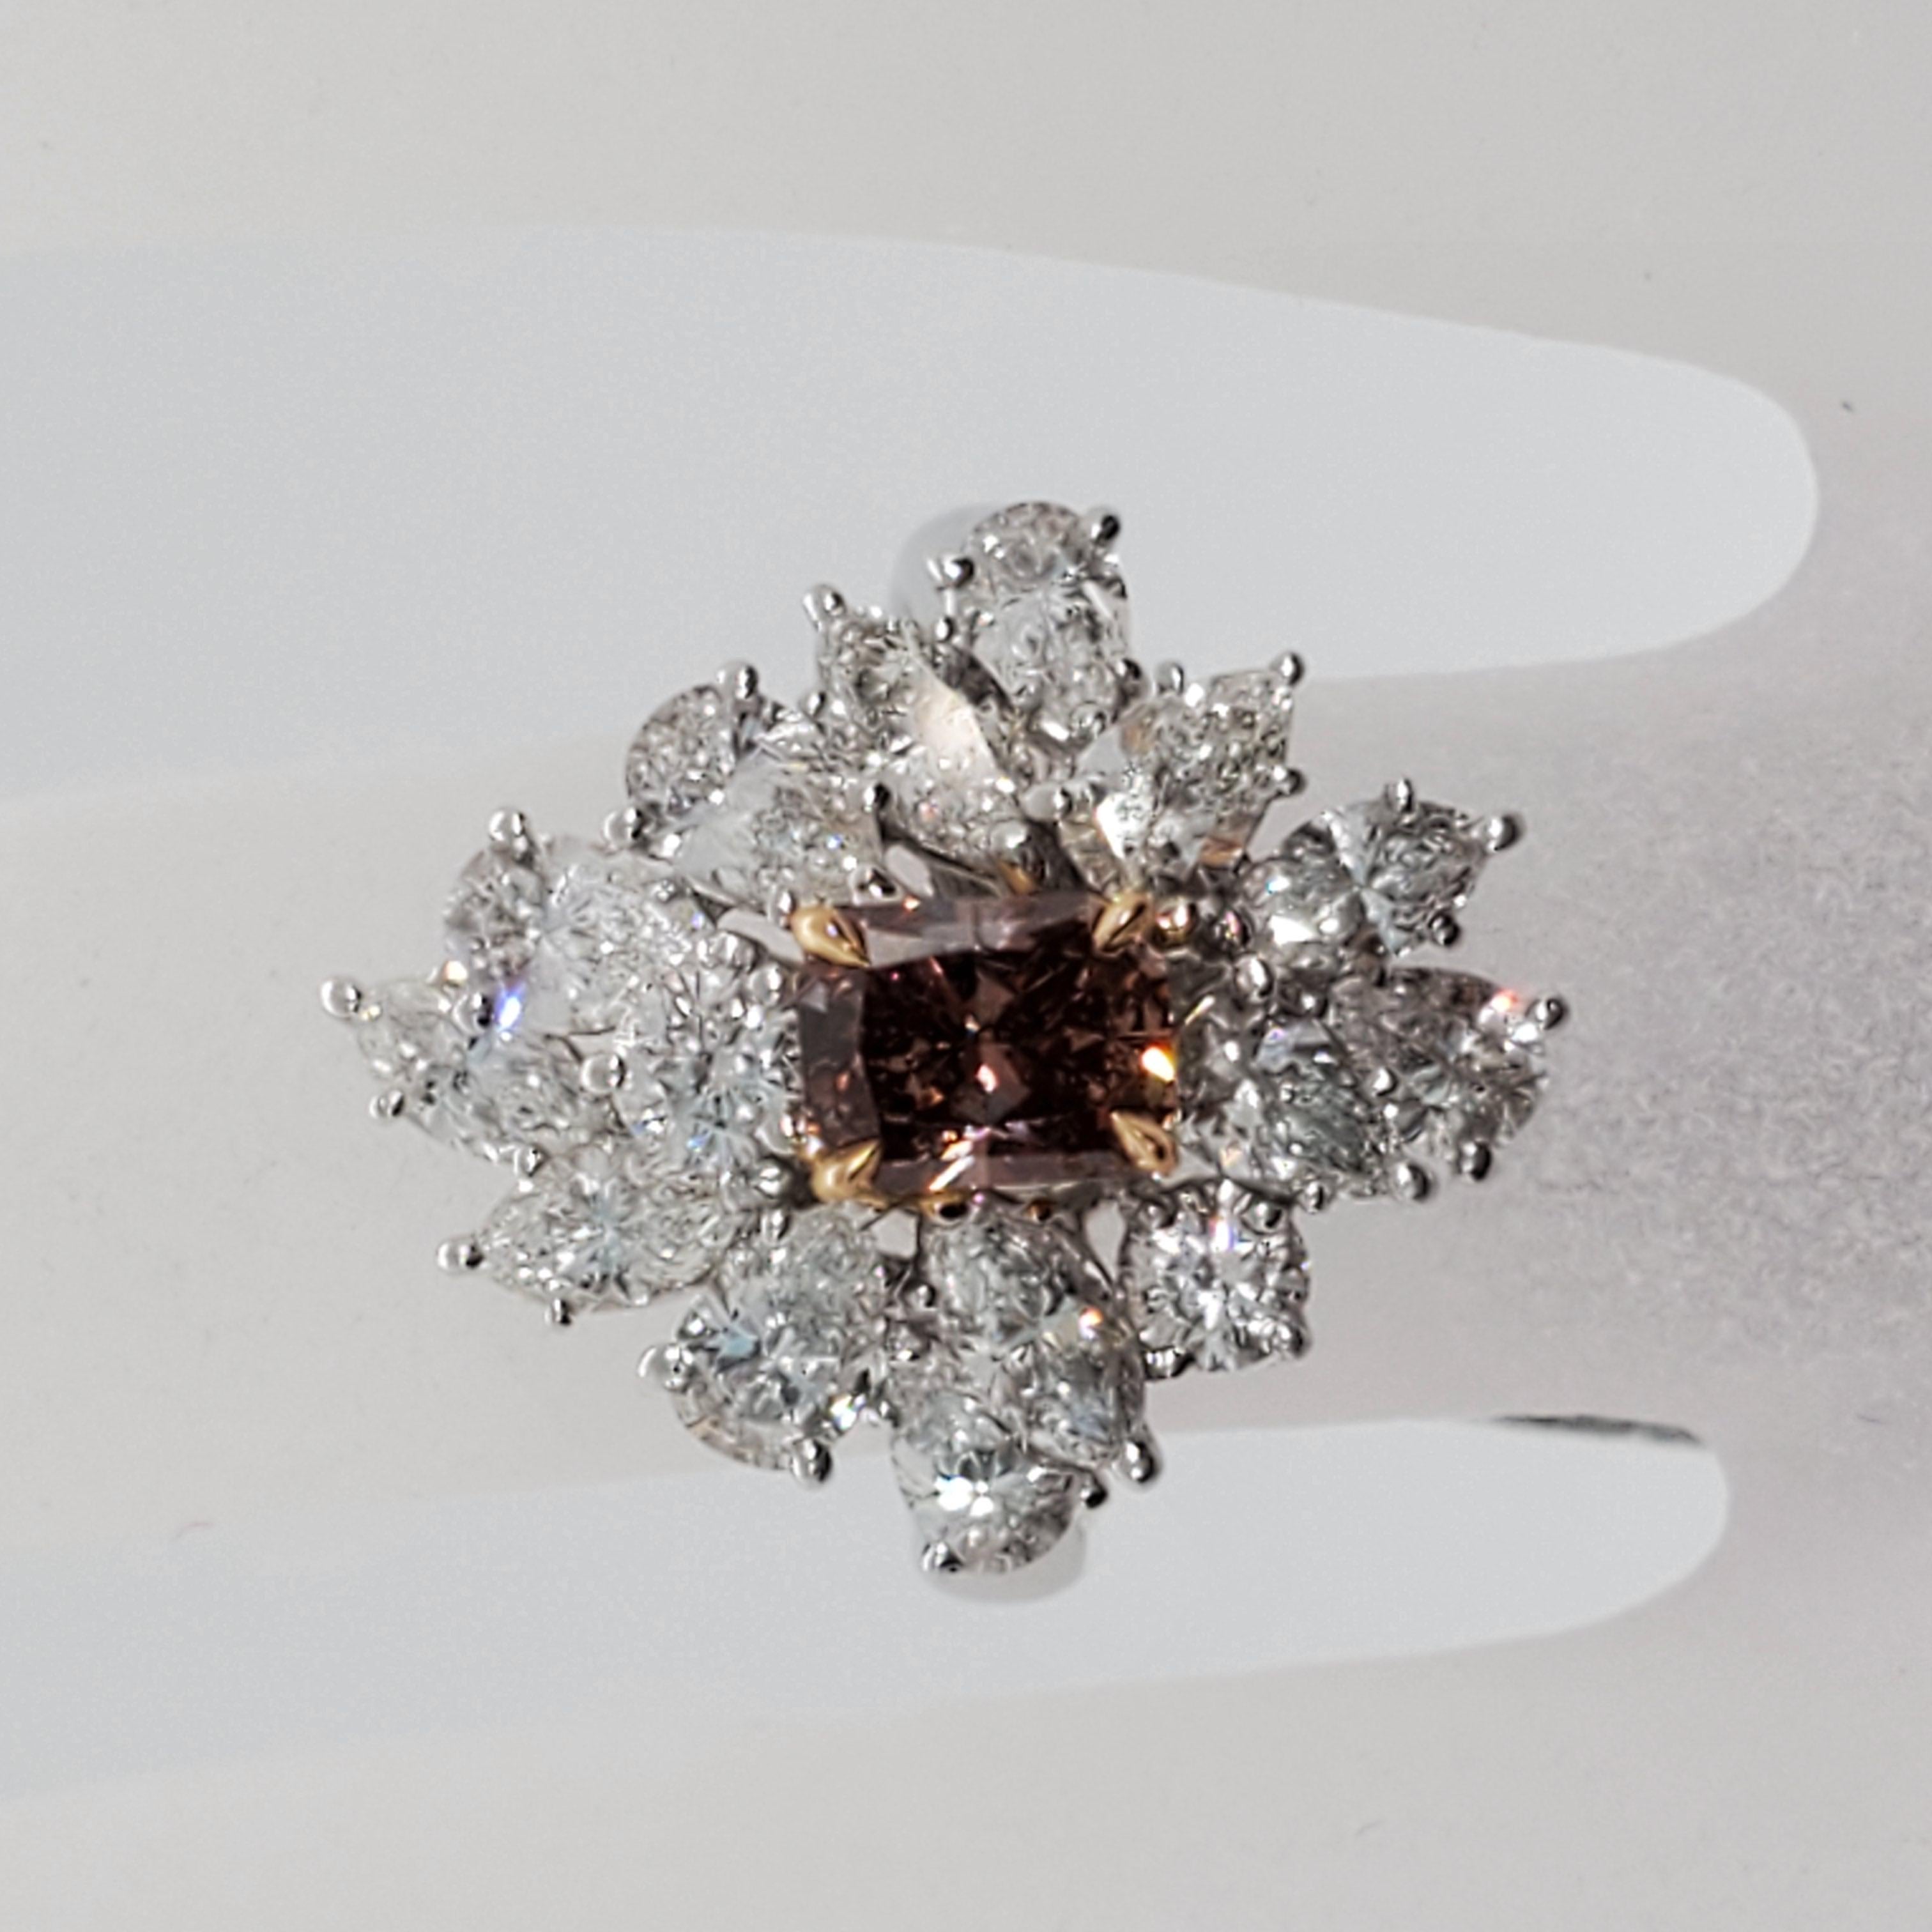 Fancy Deep Brown Pink Radiant Diamond and White Diamond Ring in Platinum and 18k 1